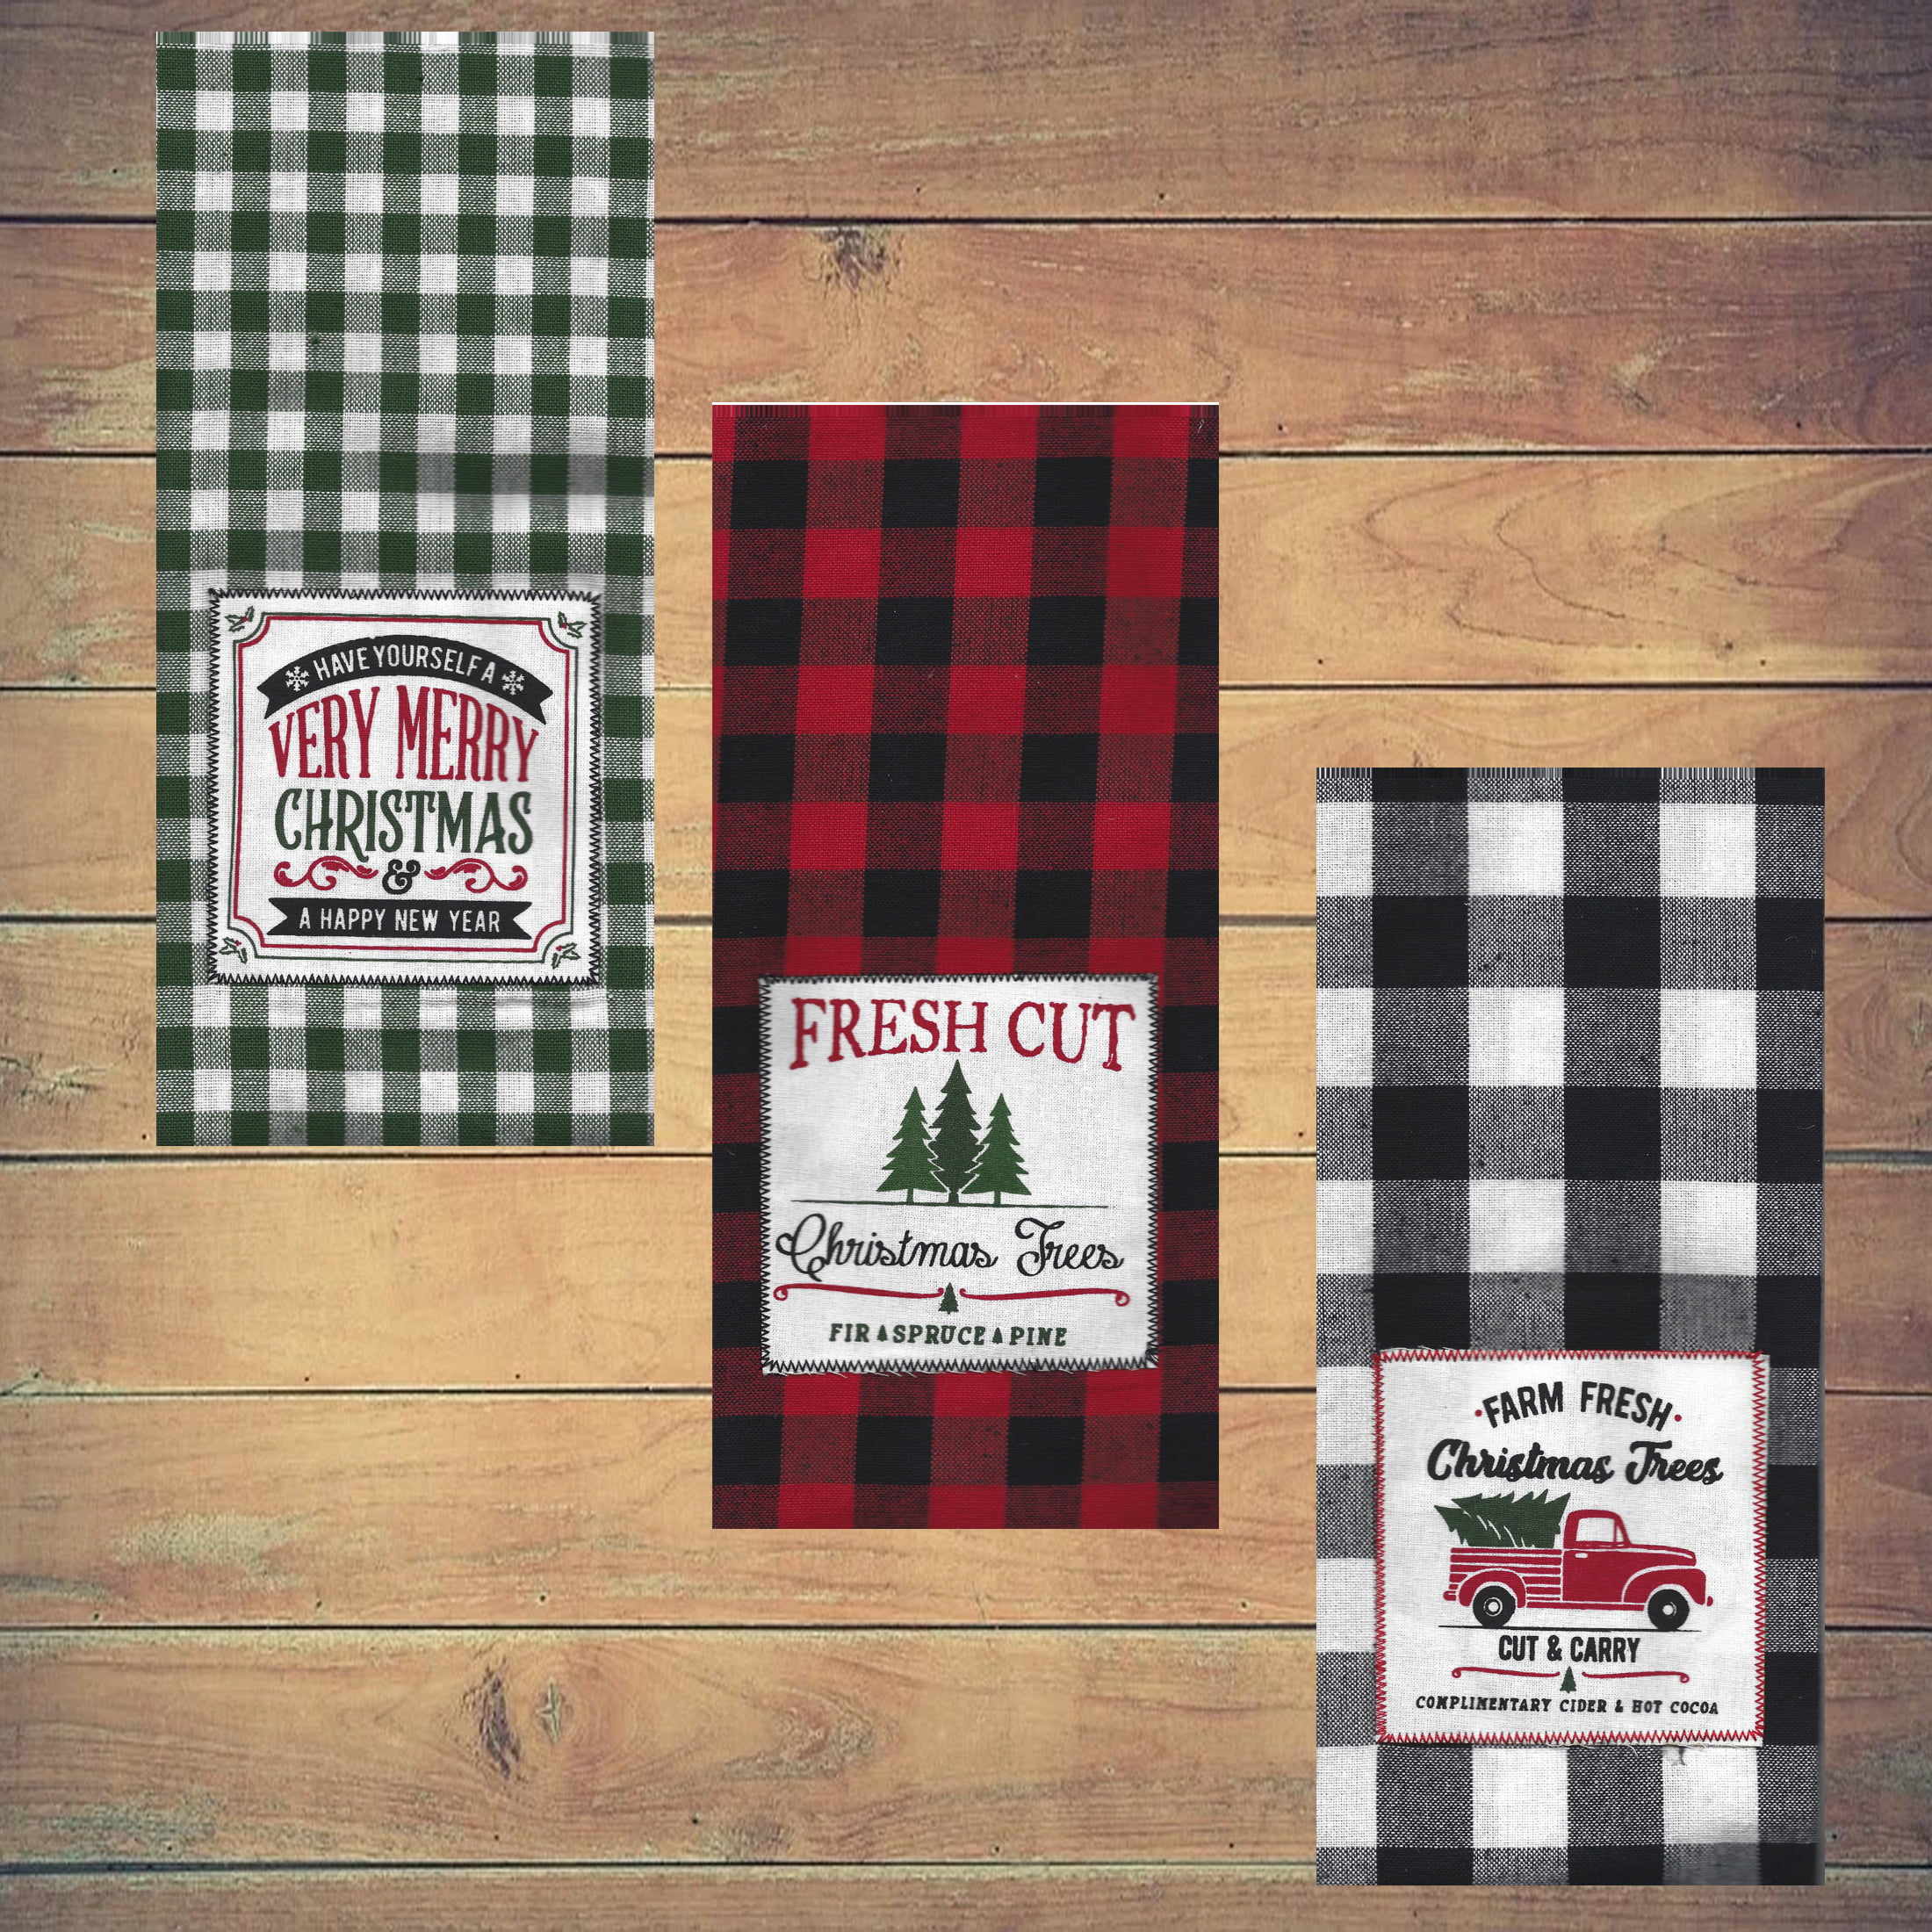 Kewadony Christmas Red Checkered Kitchen Towels 1 Pack Dish Towels for  Kitchen, Winter Red Green Buffalo Plaid Absorbent Microfiber Hand Towels  for